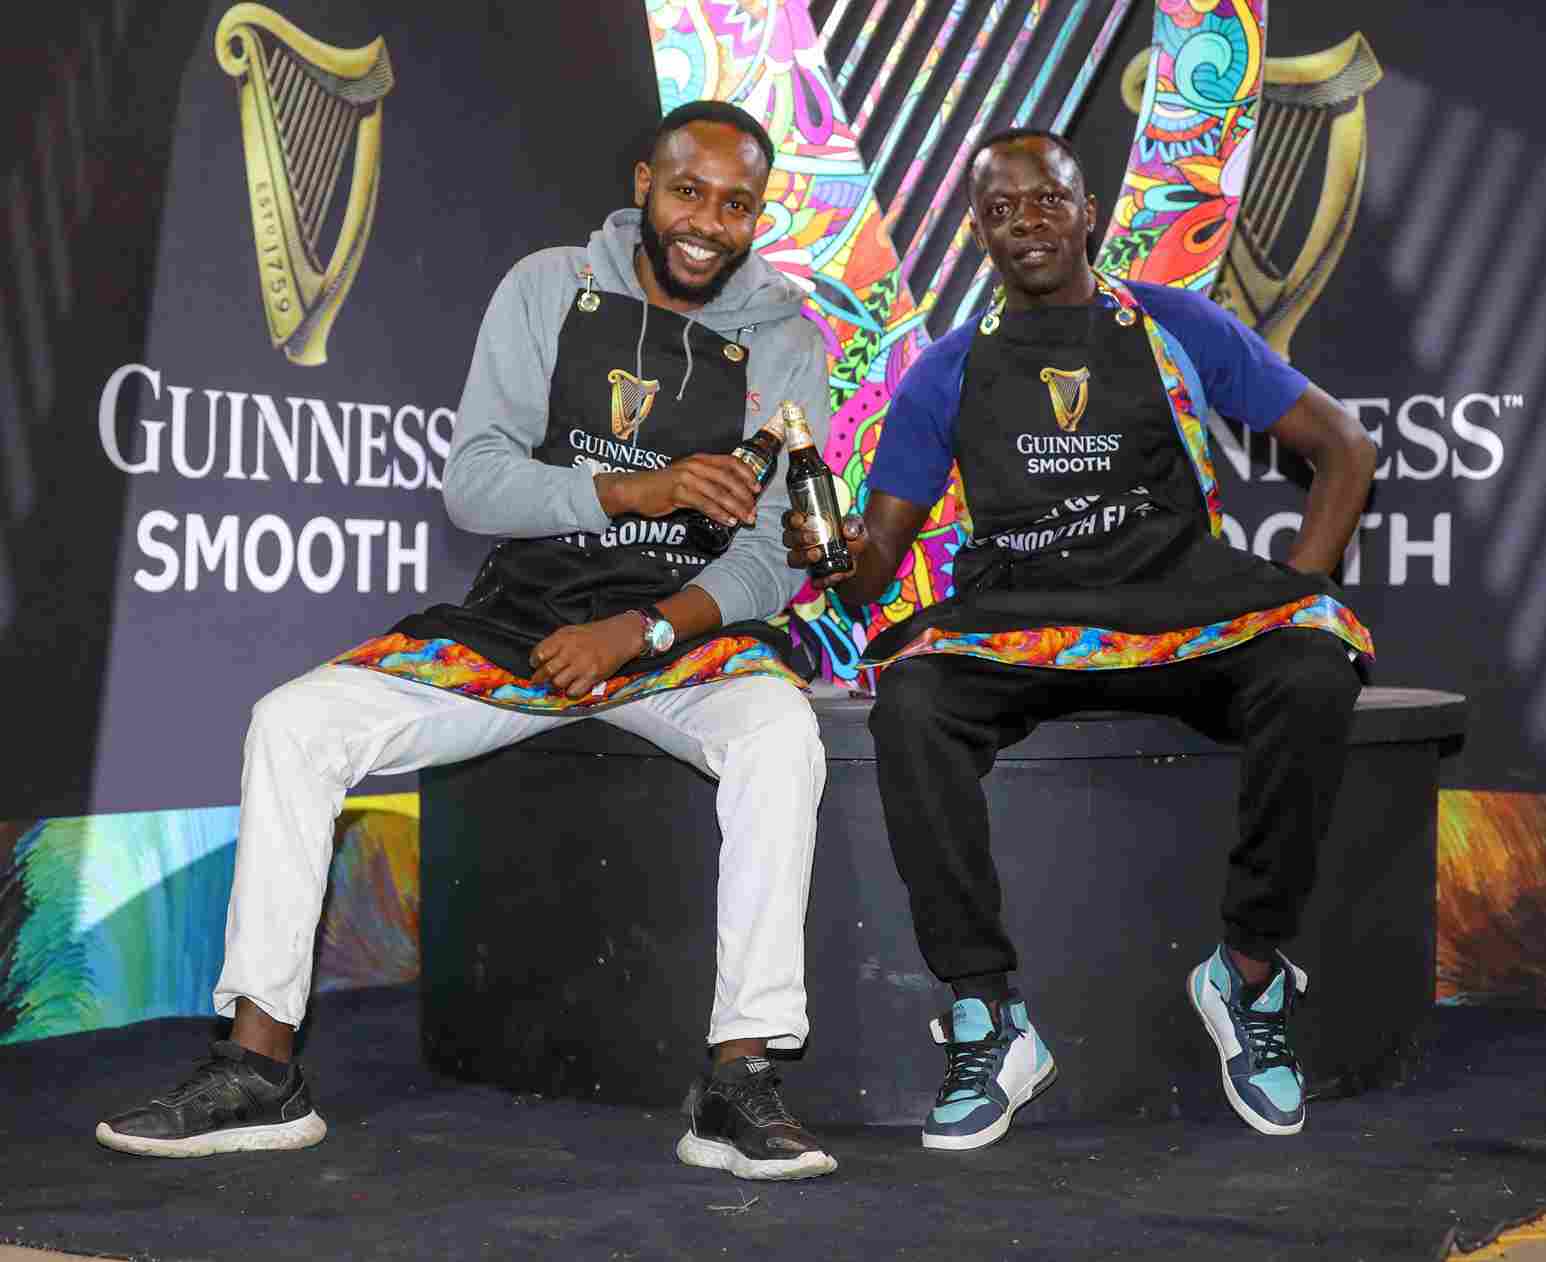 Barbers Sospeter Ngungi (Left) and Wycliff Mayaka pose for a photo during the Guinness Smooth “Easy Going, Smooth Flowing” campaign launch at TRM.